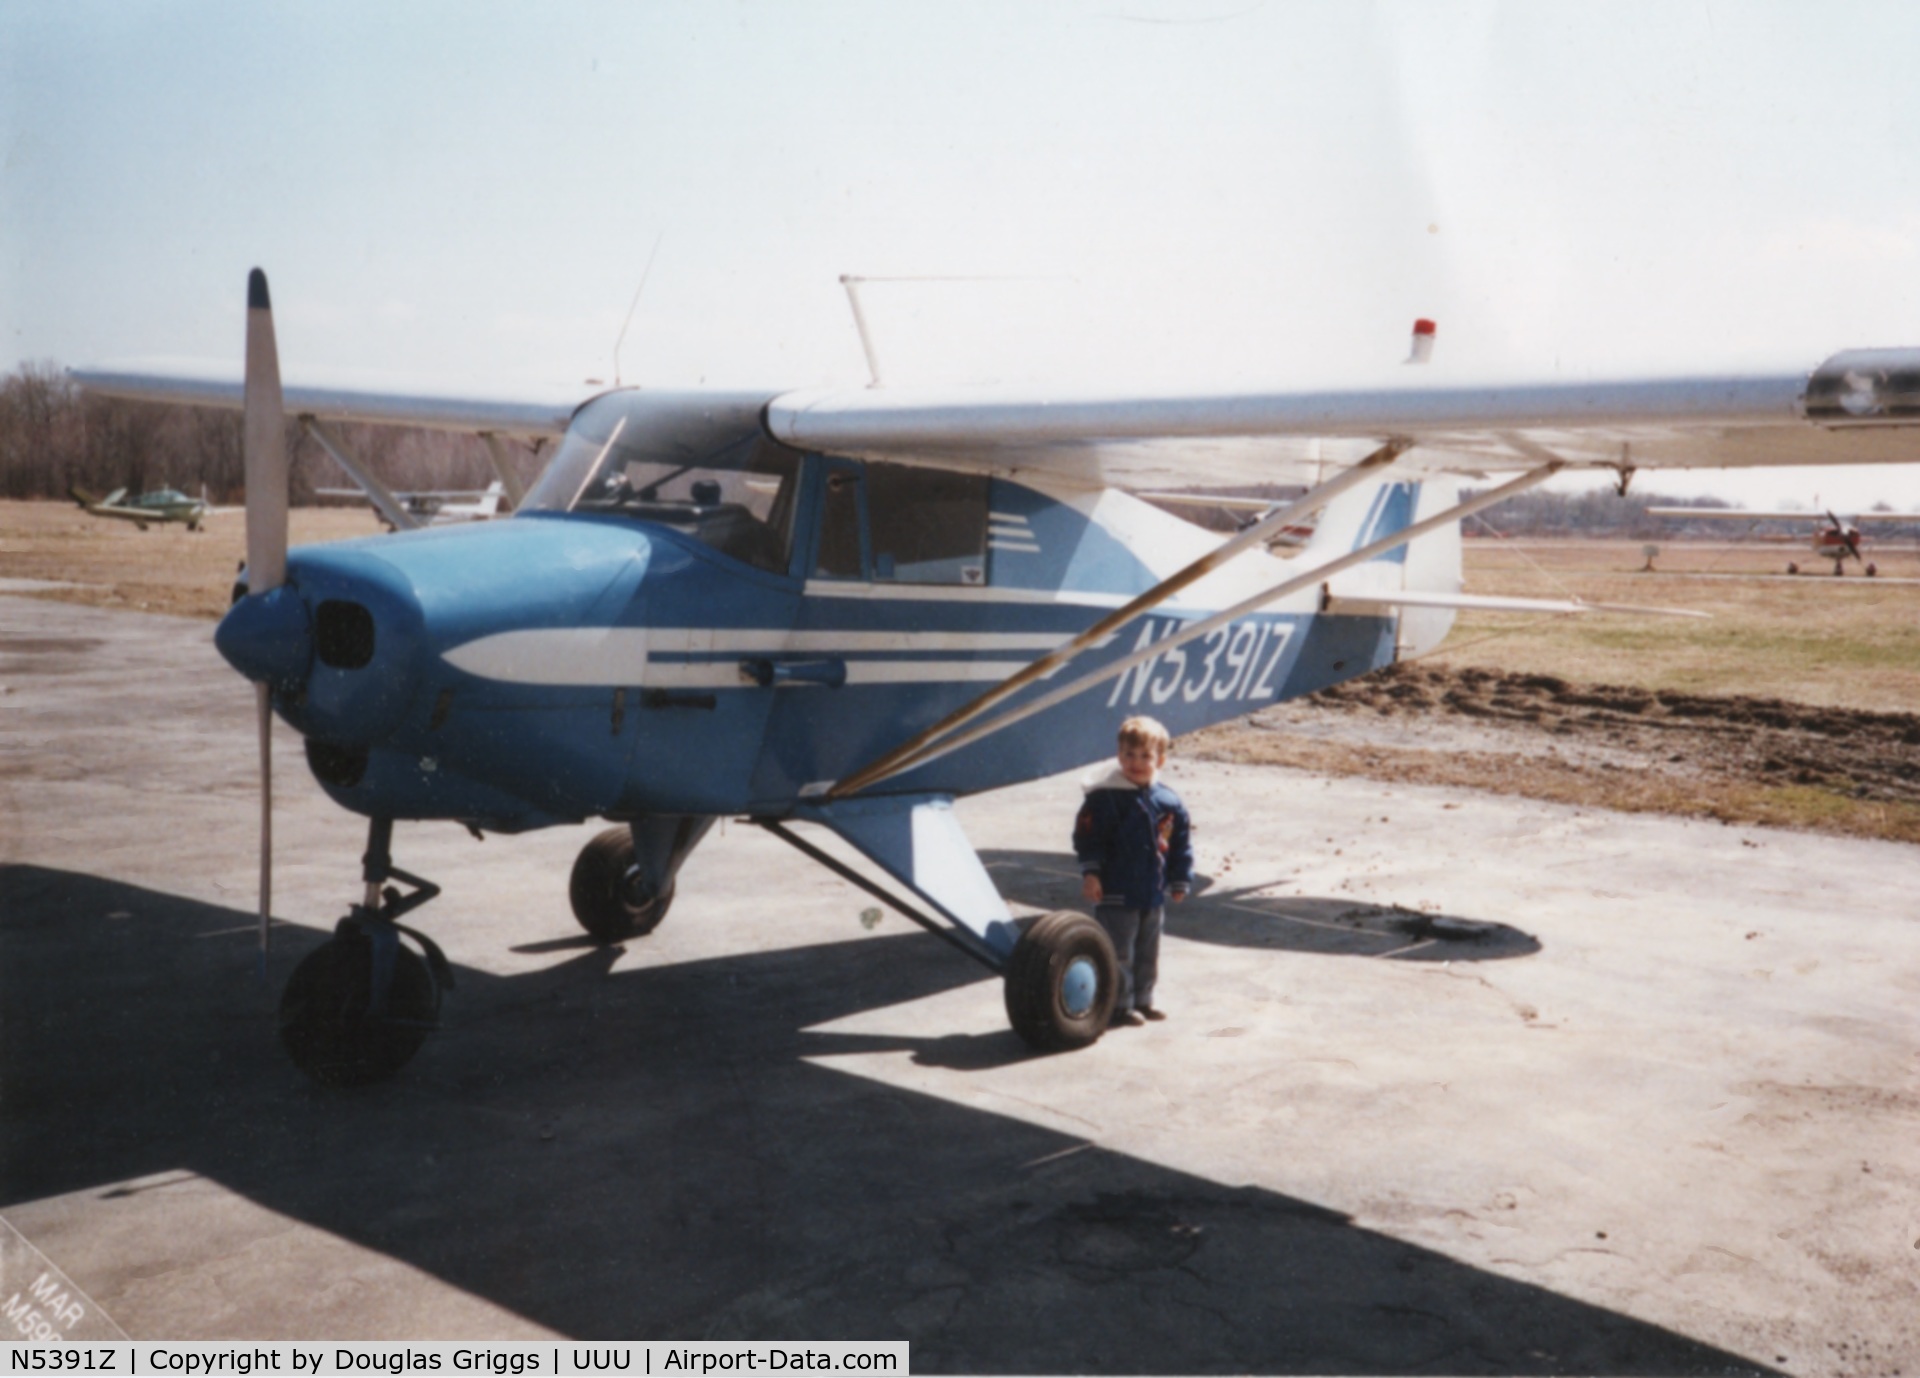 N5391Z, 1961 Piper PA-22-108 Colt C/N 22-9160, Photo from about 1989 in Newport RI.  Aircraft belonged to a colleague who offered to take my son for a ride.